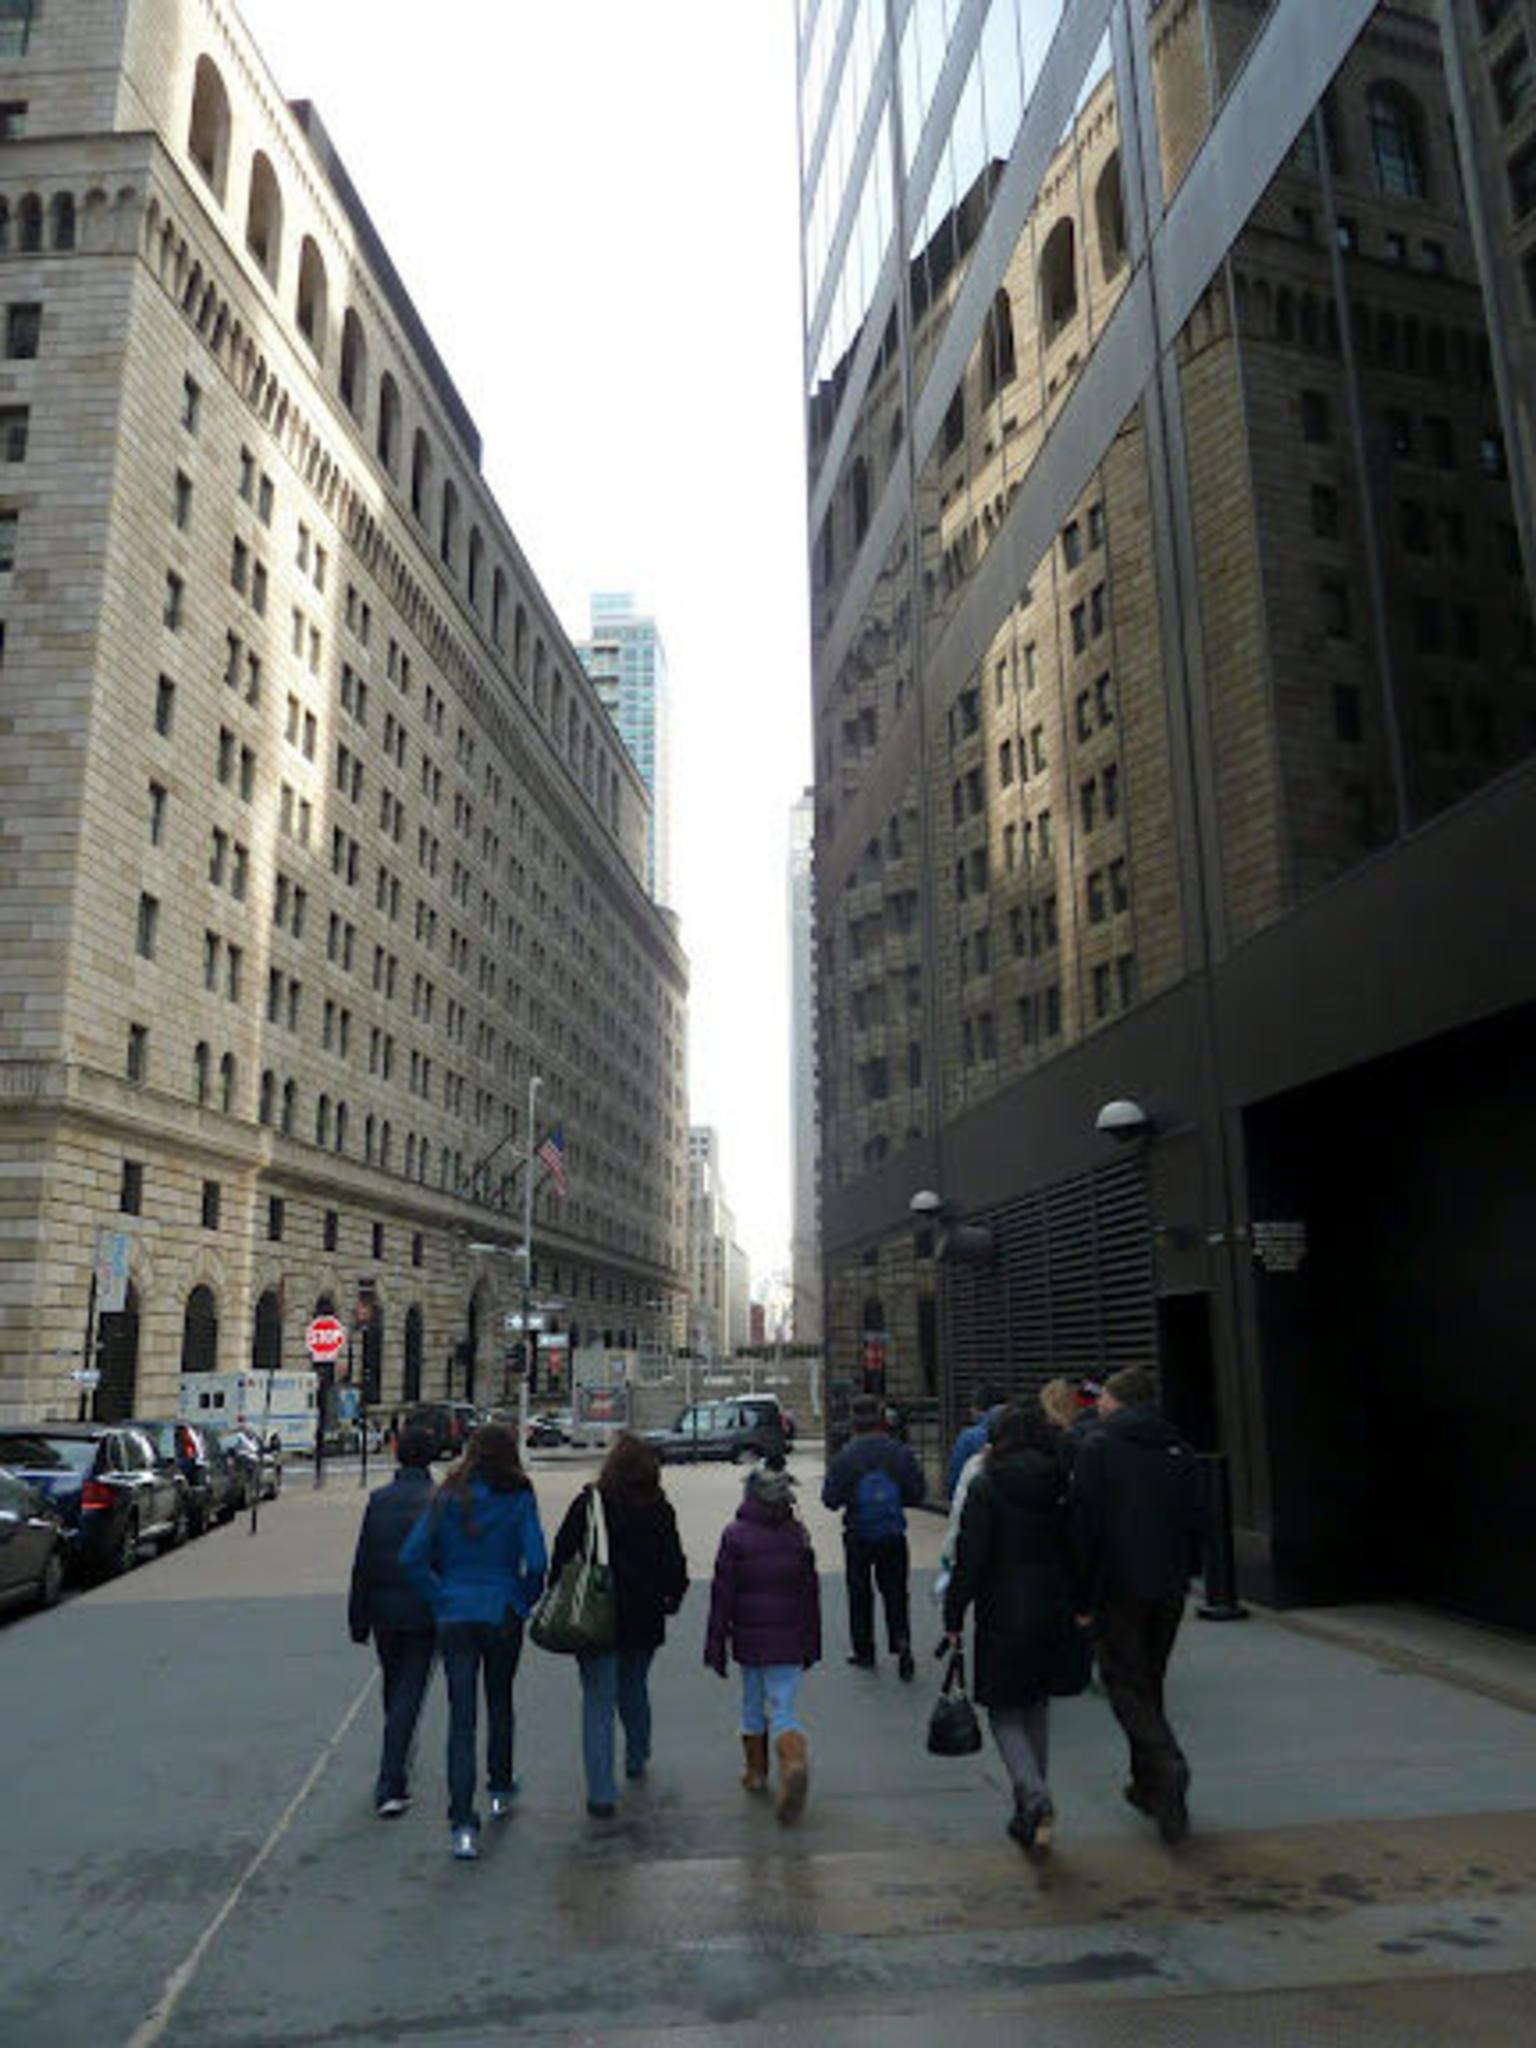 The Wall Street Experience - walking on the tour